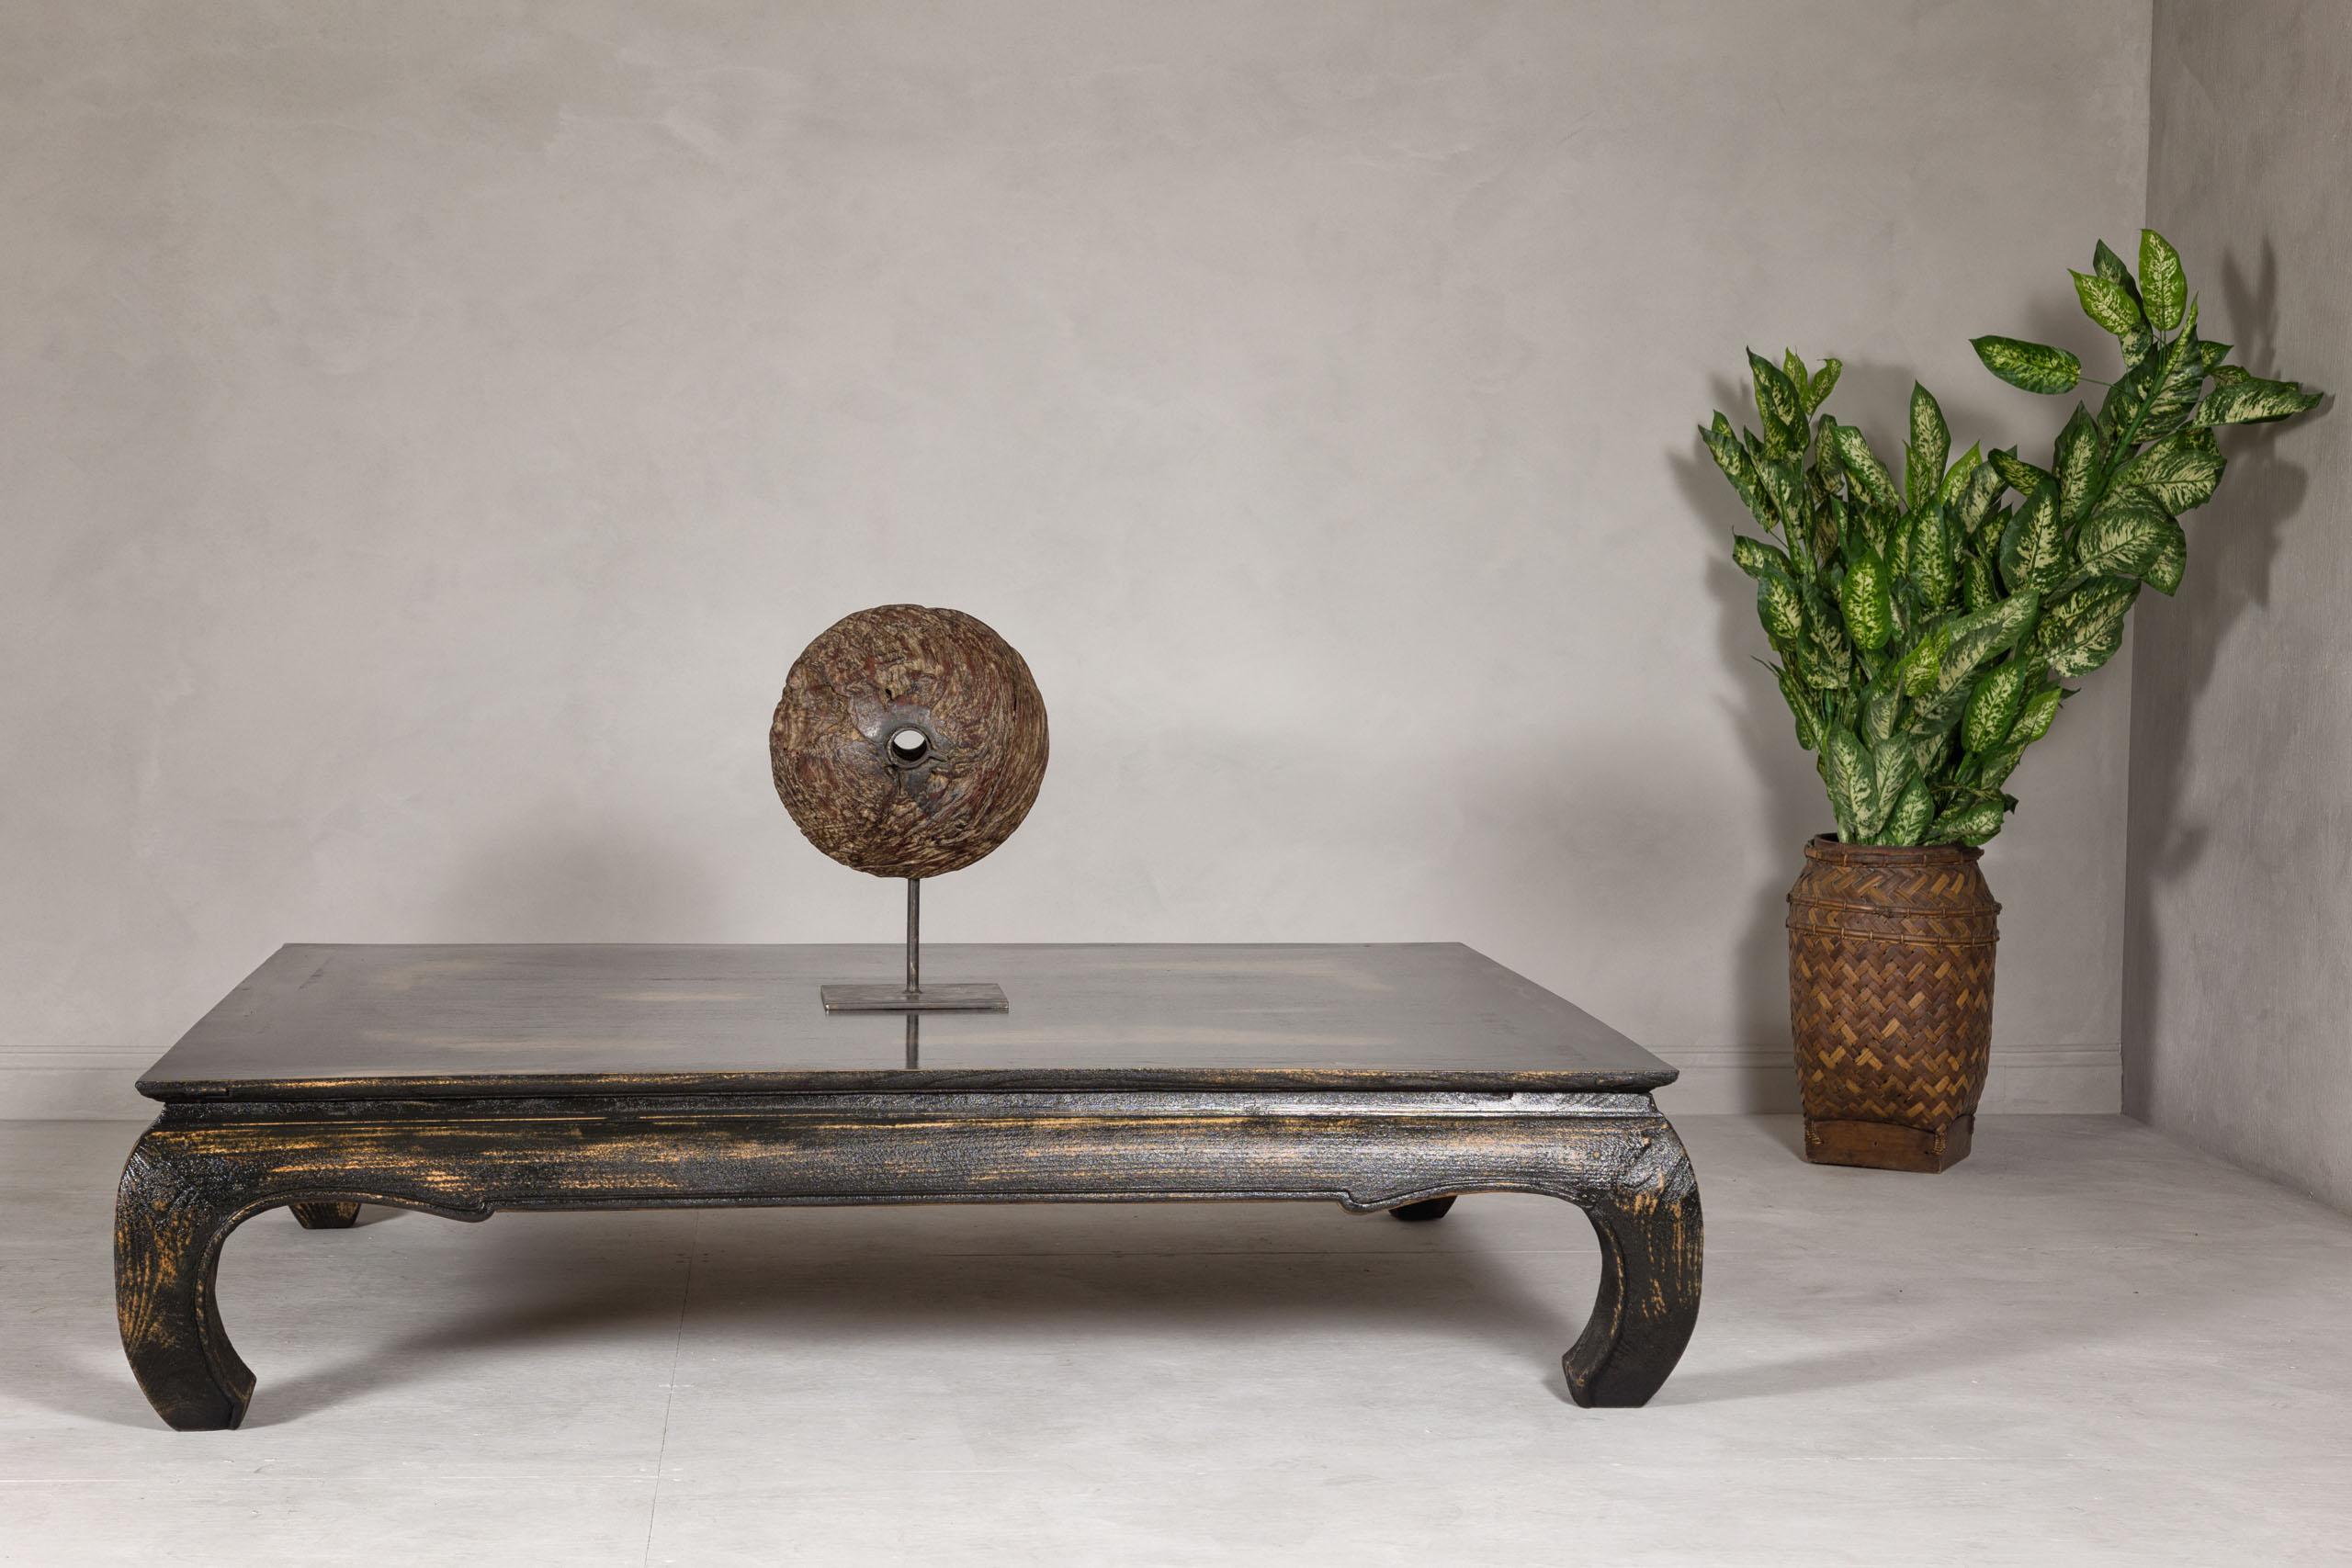 A Chow leg low Kang coffee table from the mid 20th century with custom black distressed finish. Elevate your living space with the timeless sophistication of this mid-20th century Chow leg Kang coffee table, masterfully restored to accentuate its